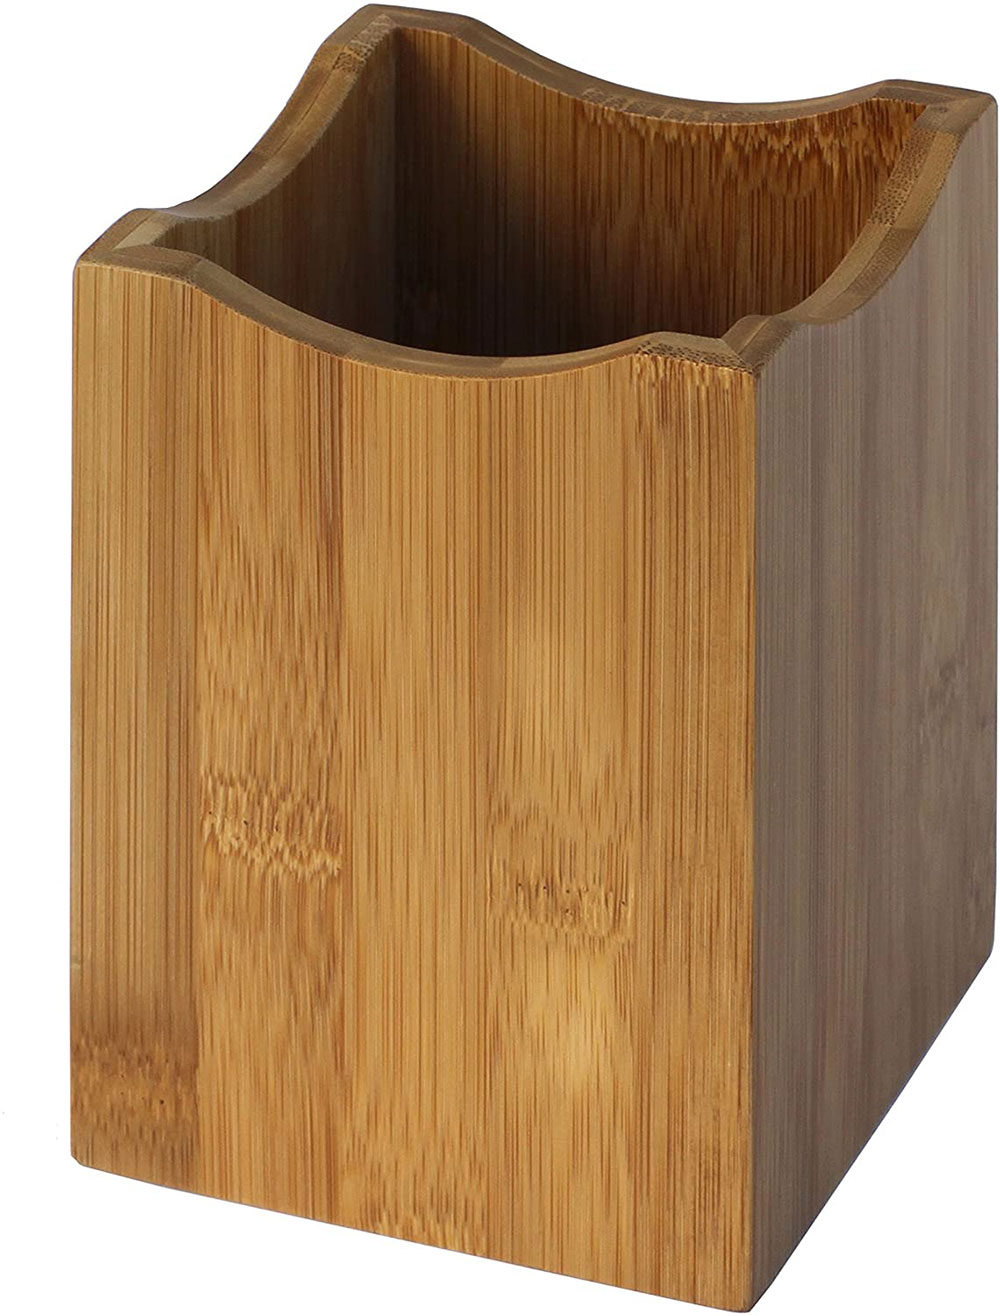 Oceanstar Bamboo Utensil Holder What is the best kitchen utensil holder out there?